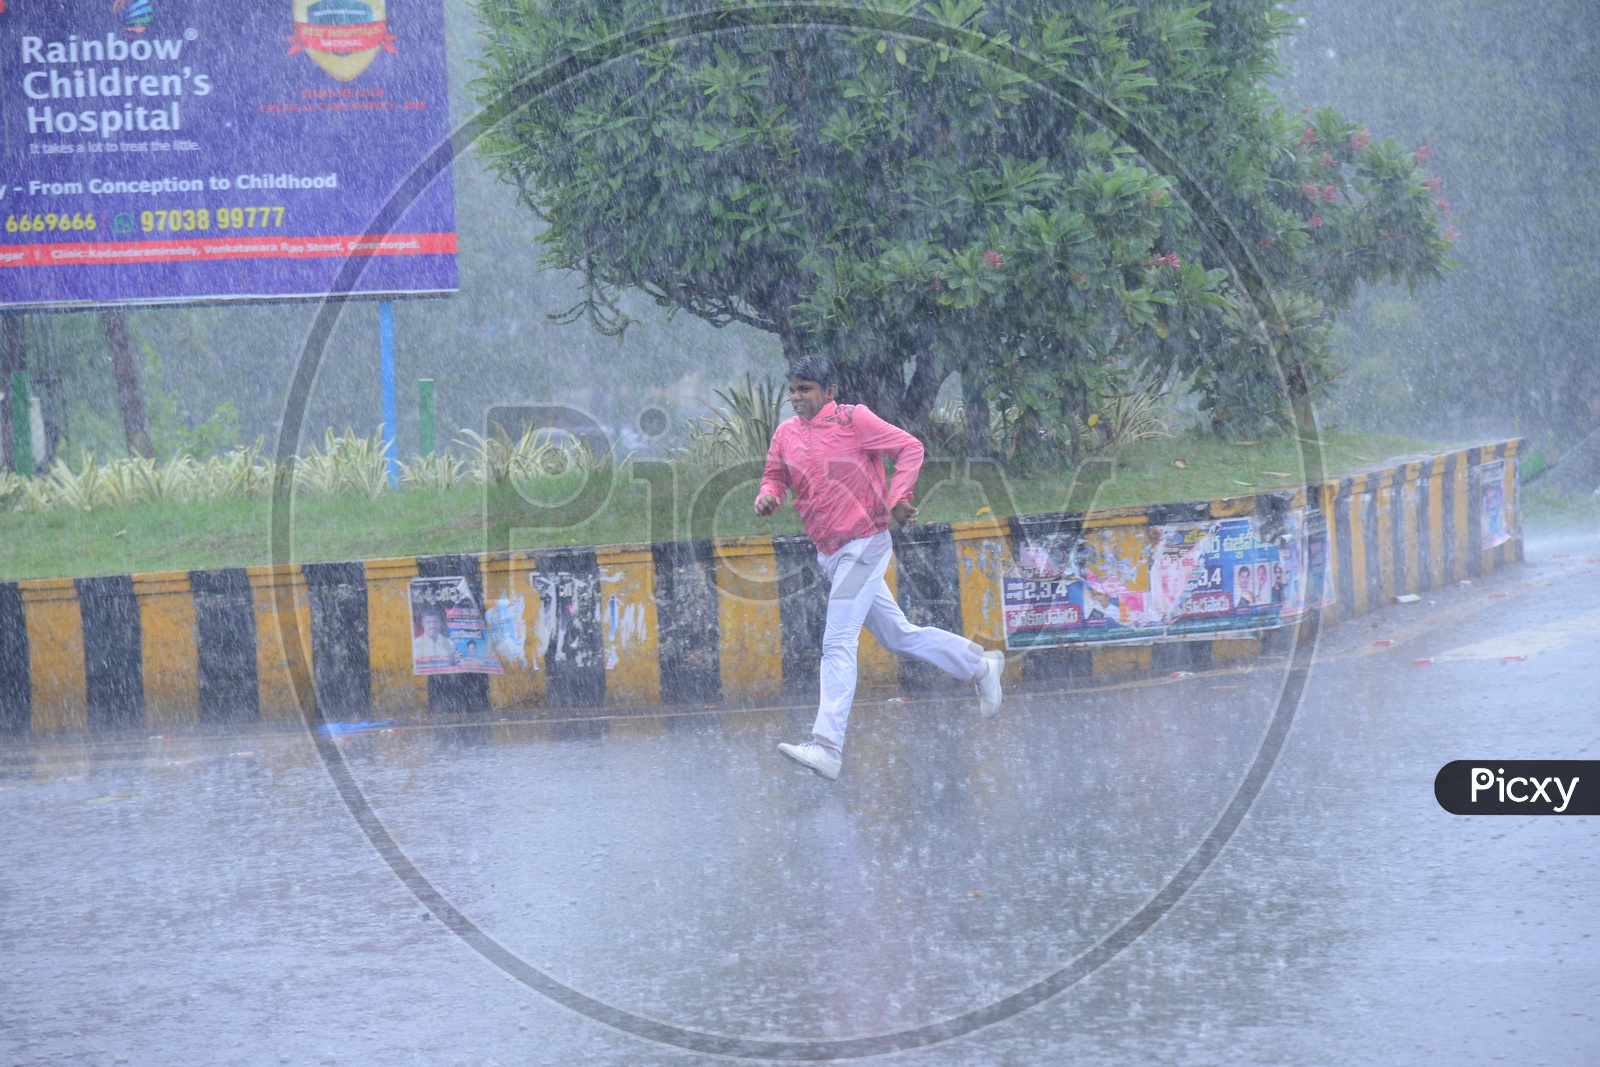 A man running on the road while its raining